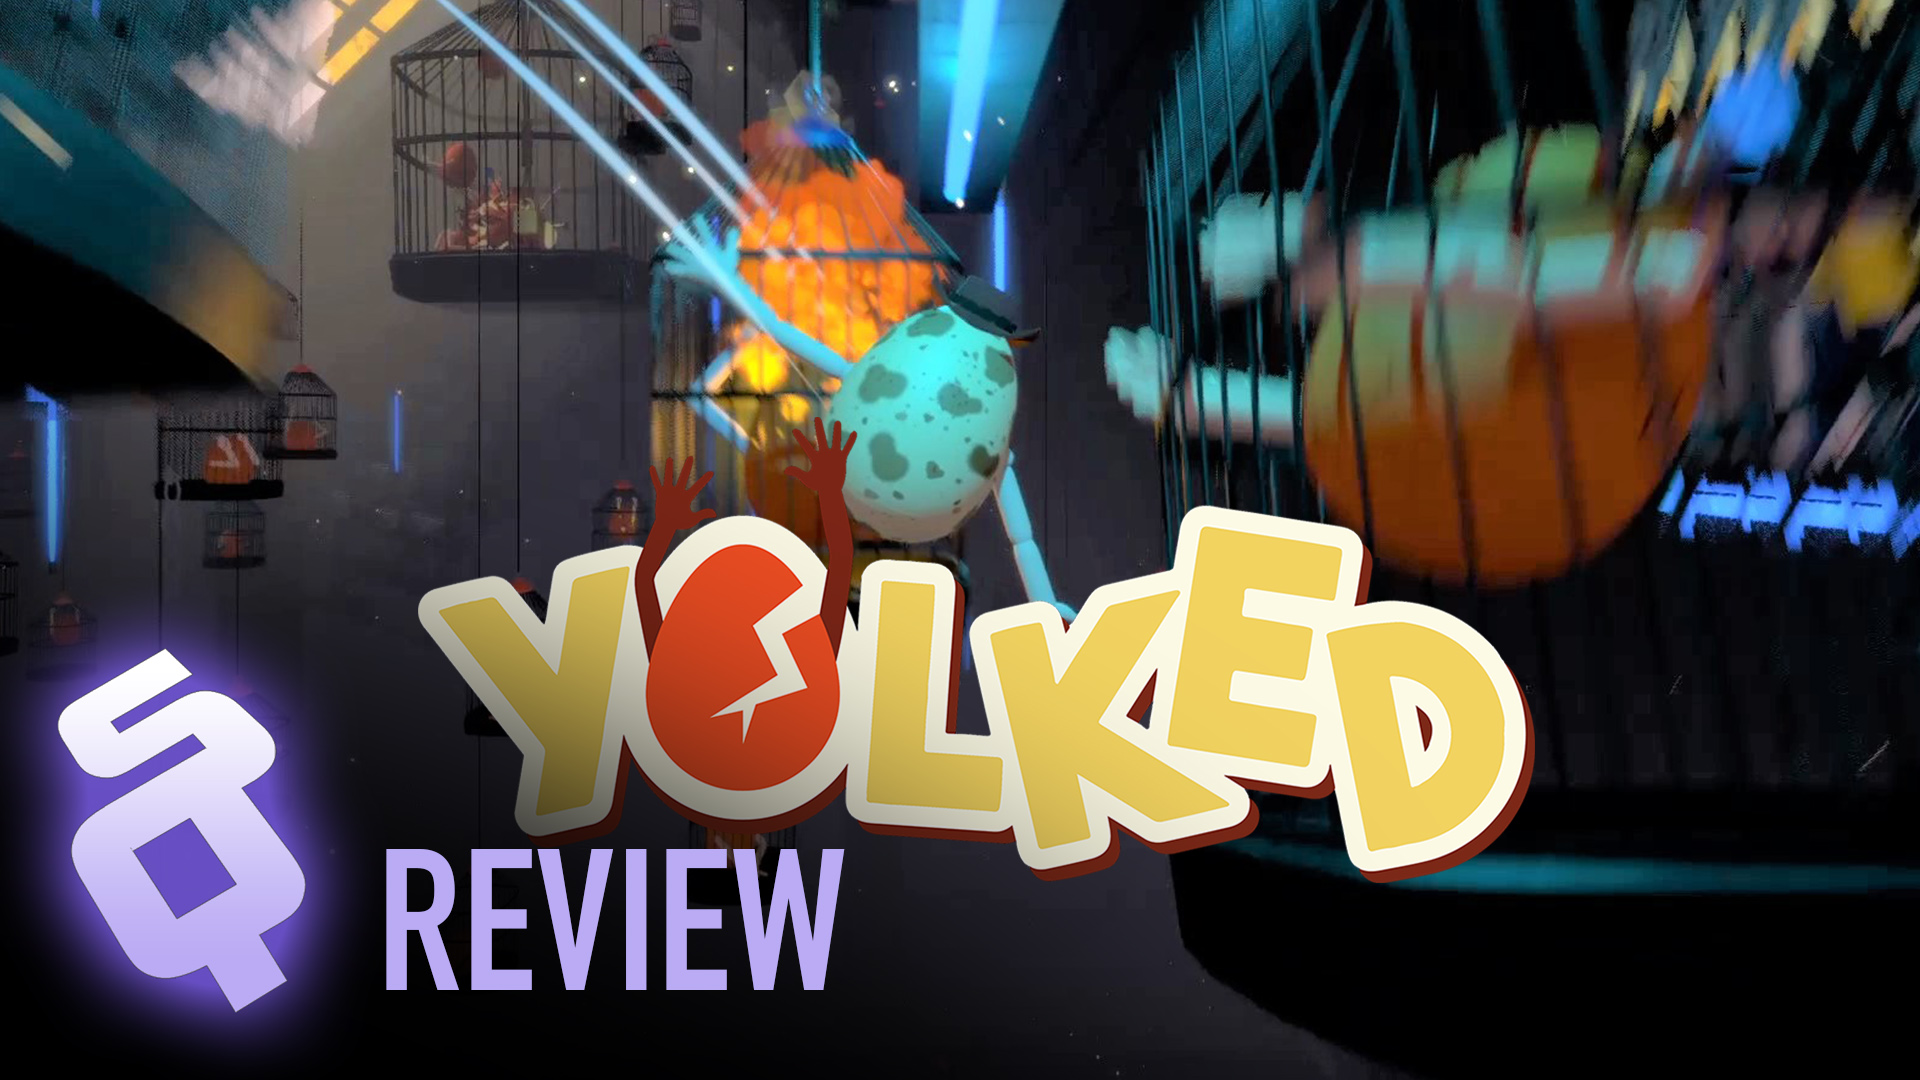 Yolked review